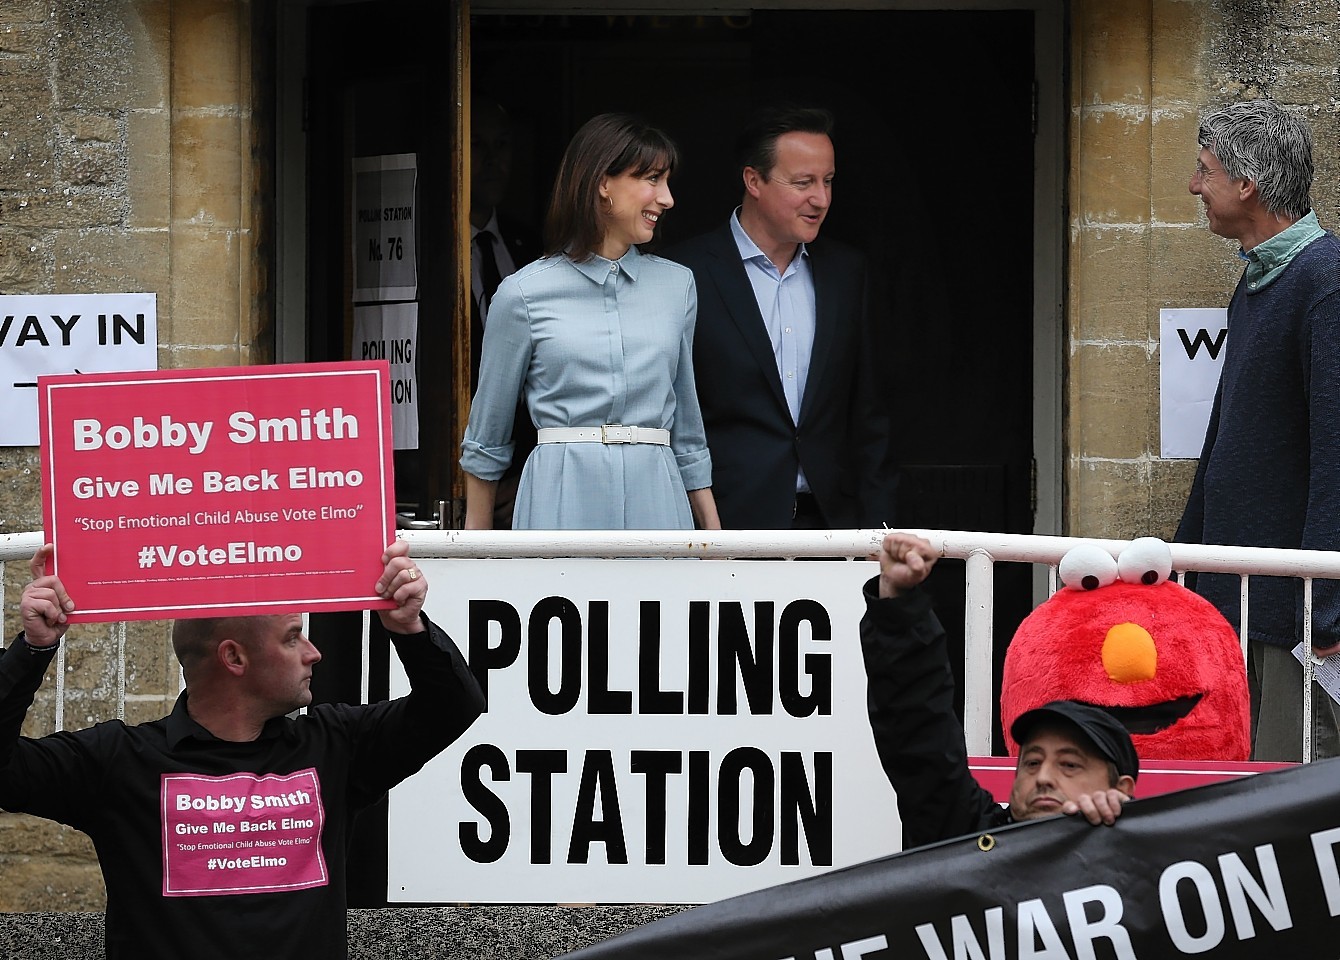 Leader Of The Conservative Party, David Cameron, Casts His Vote As The UK Goes To The Polls